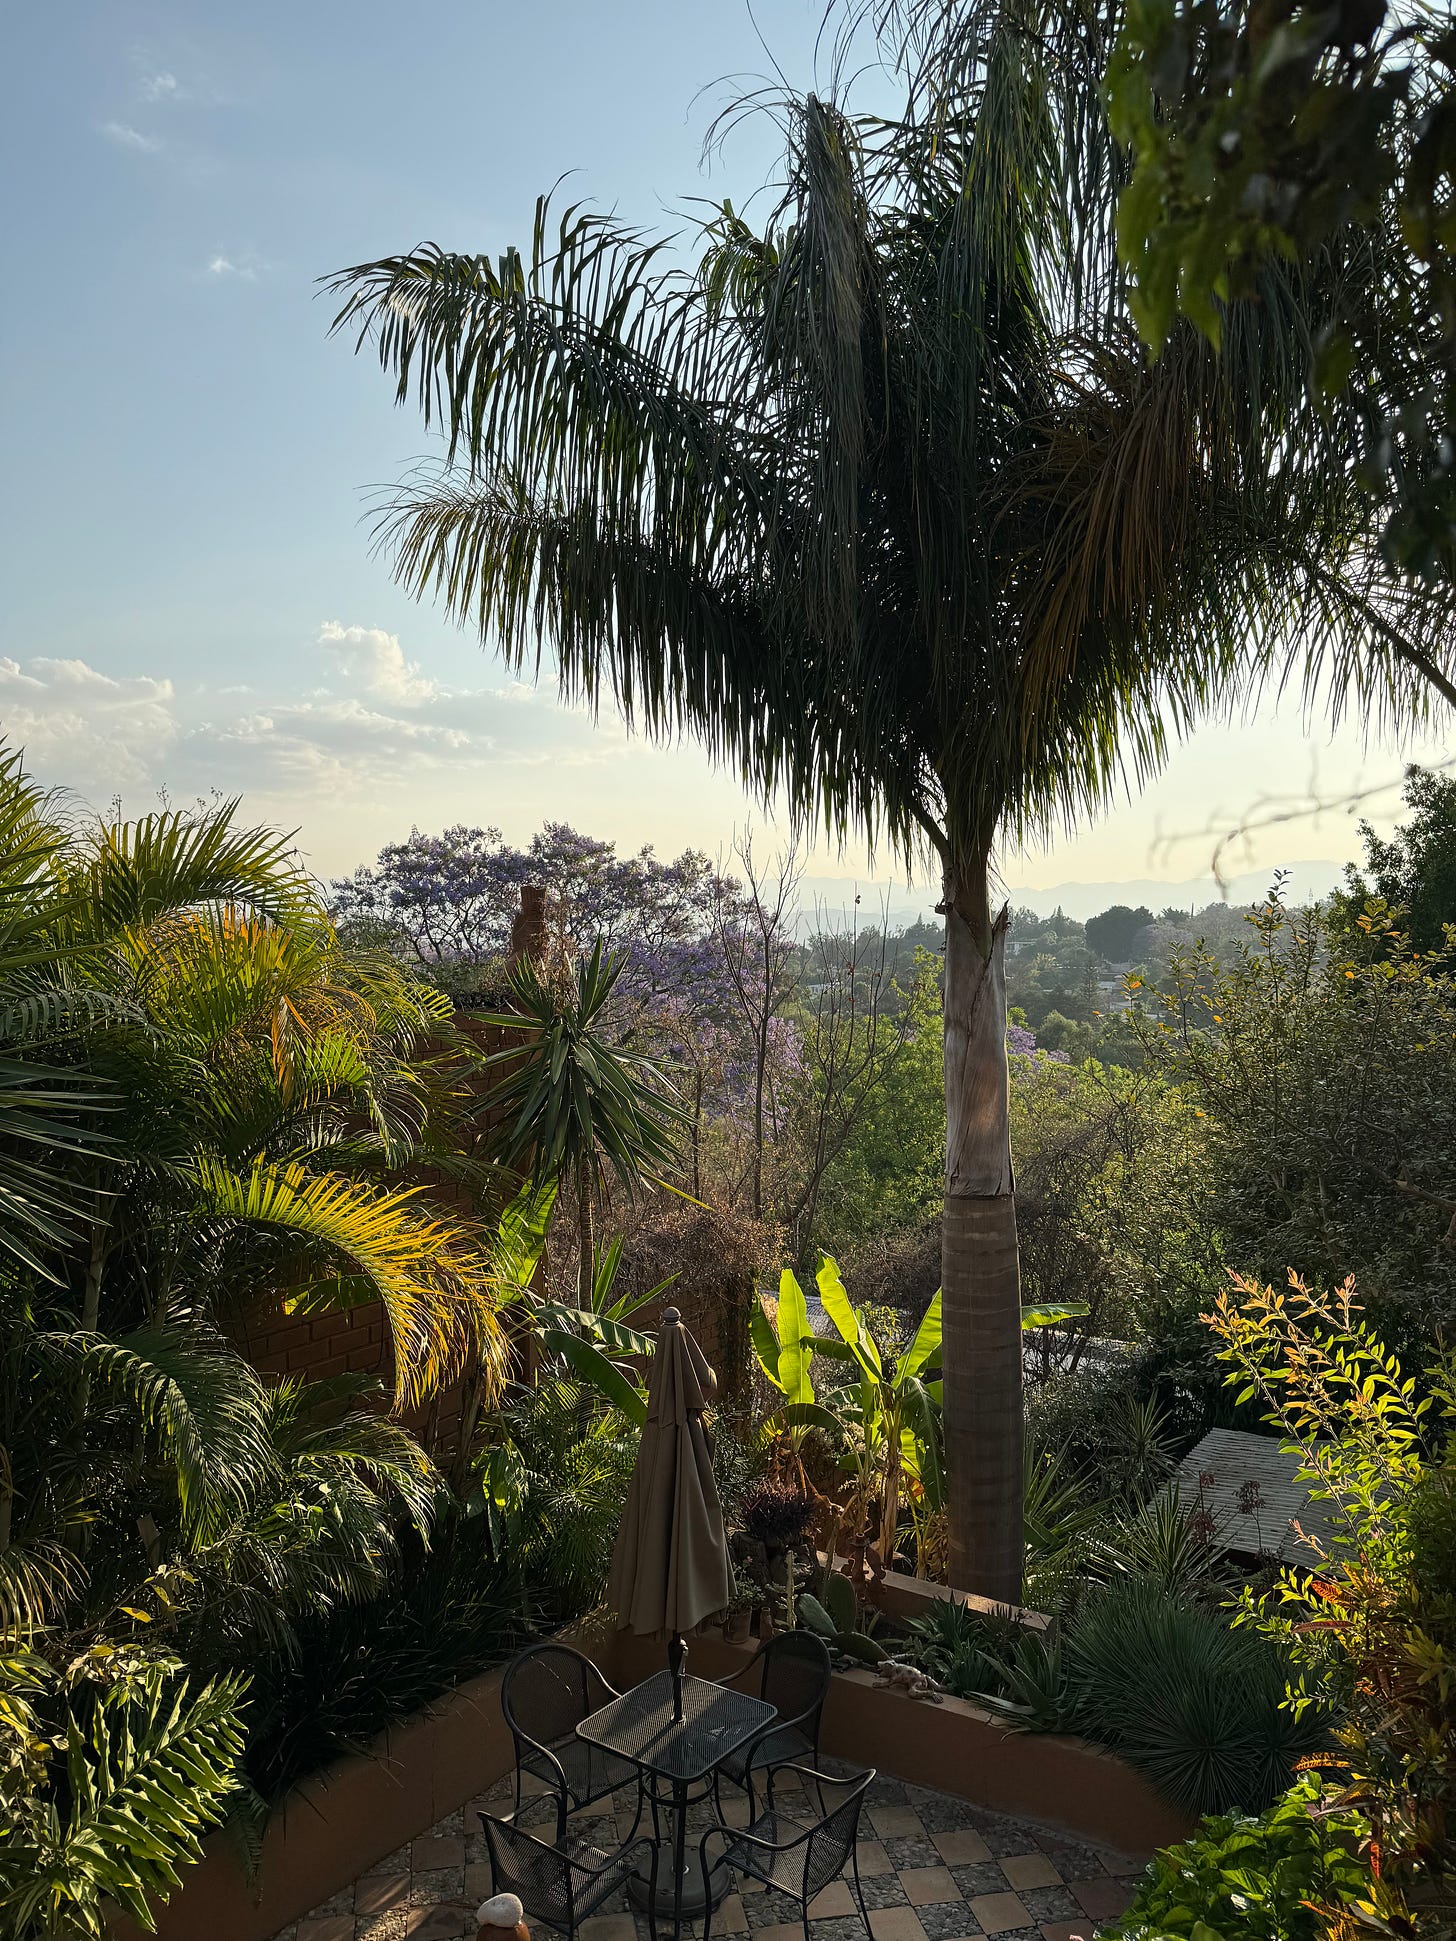 A photograph of a large palm tree sitting behind a patio. A view of the Oaxacan hills is in the distance.